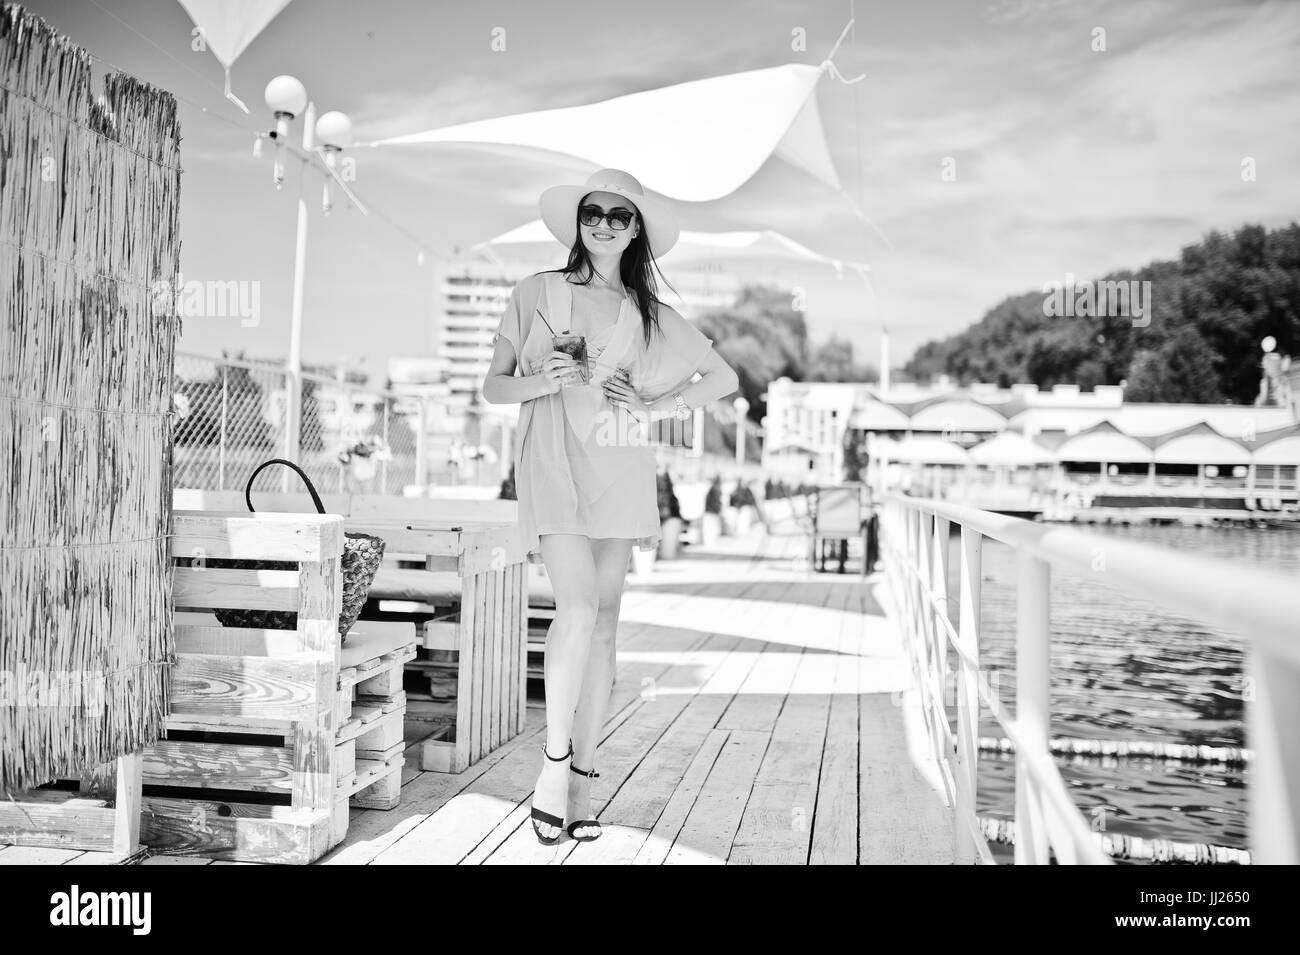 Portrait of an attractive woman in transparent turquoise dress posing with a cocktail in her hand by the lake. Black and white photo. Stock Photo